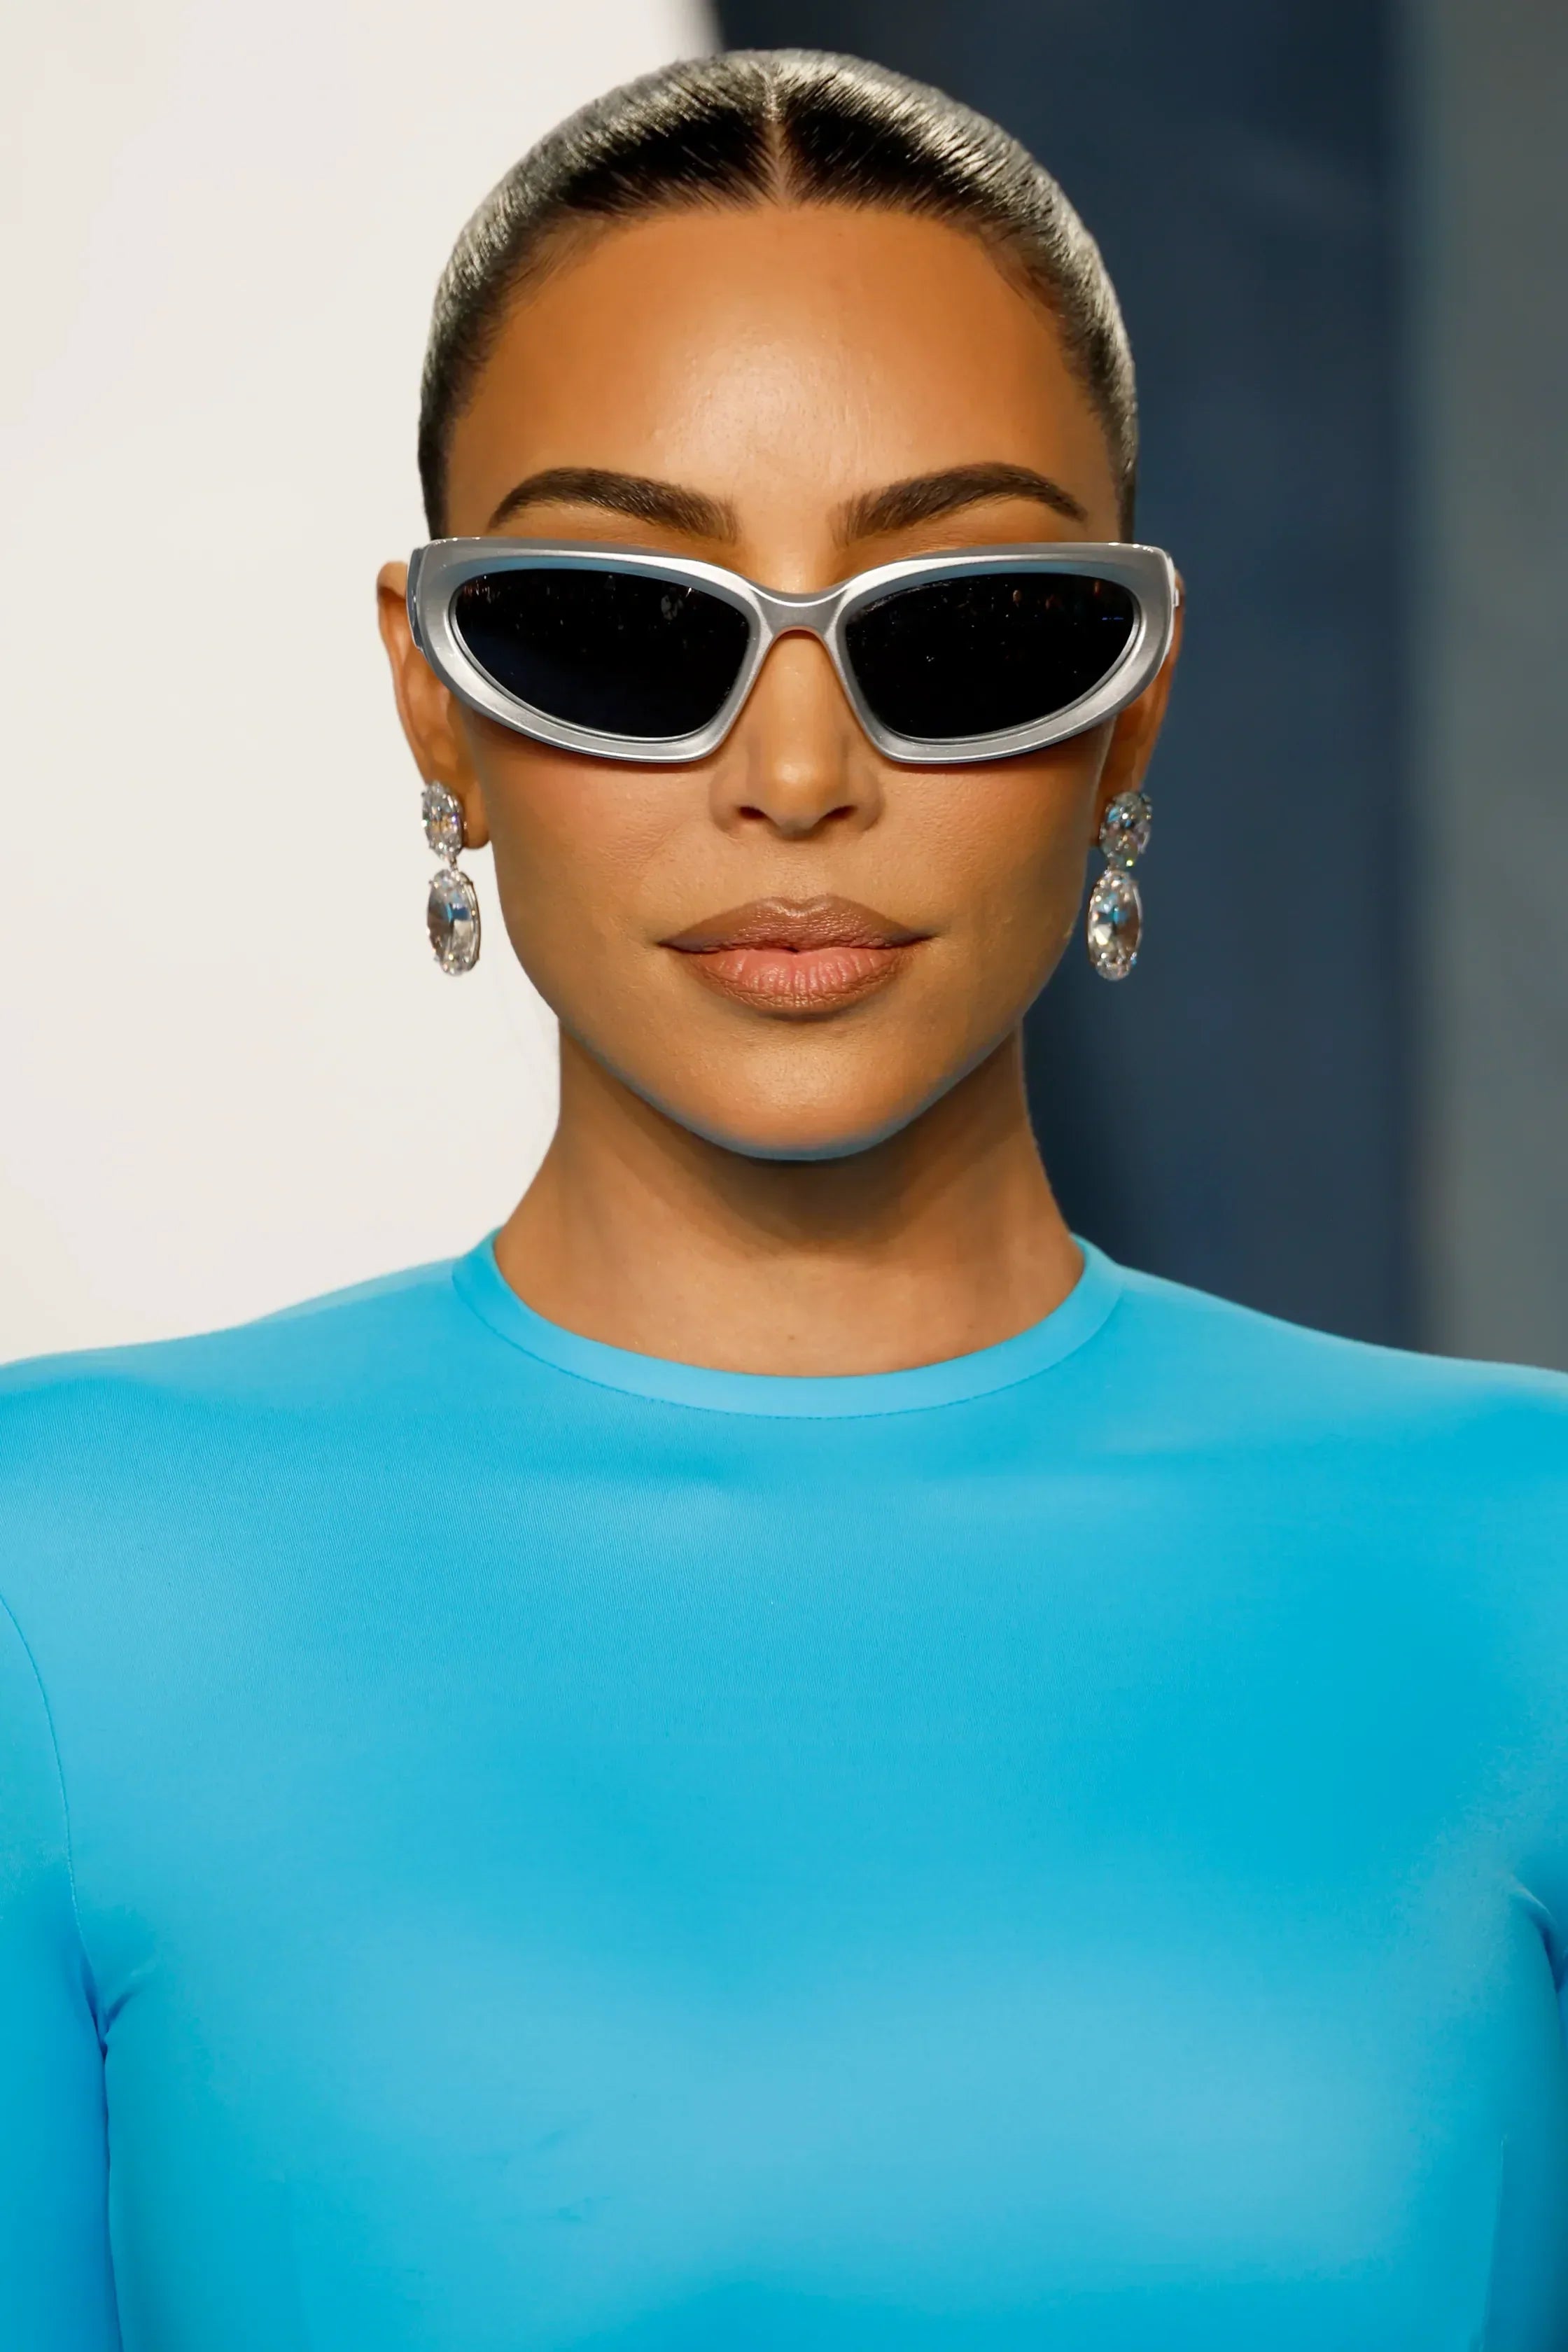 Top Sunglasses Trends for 2023: Stay Ahead of the Fashion Game